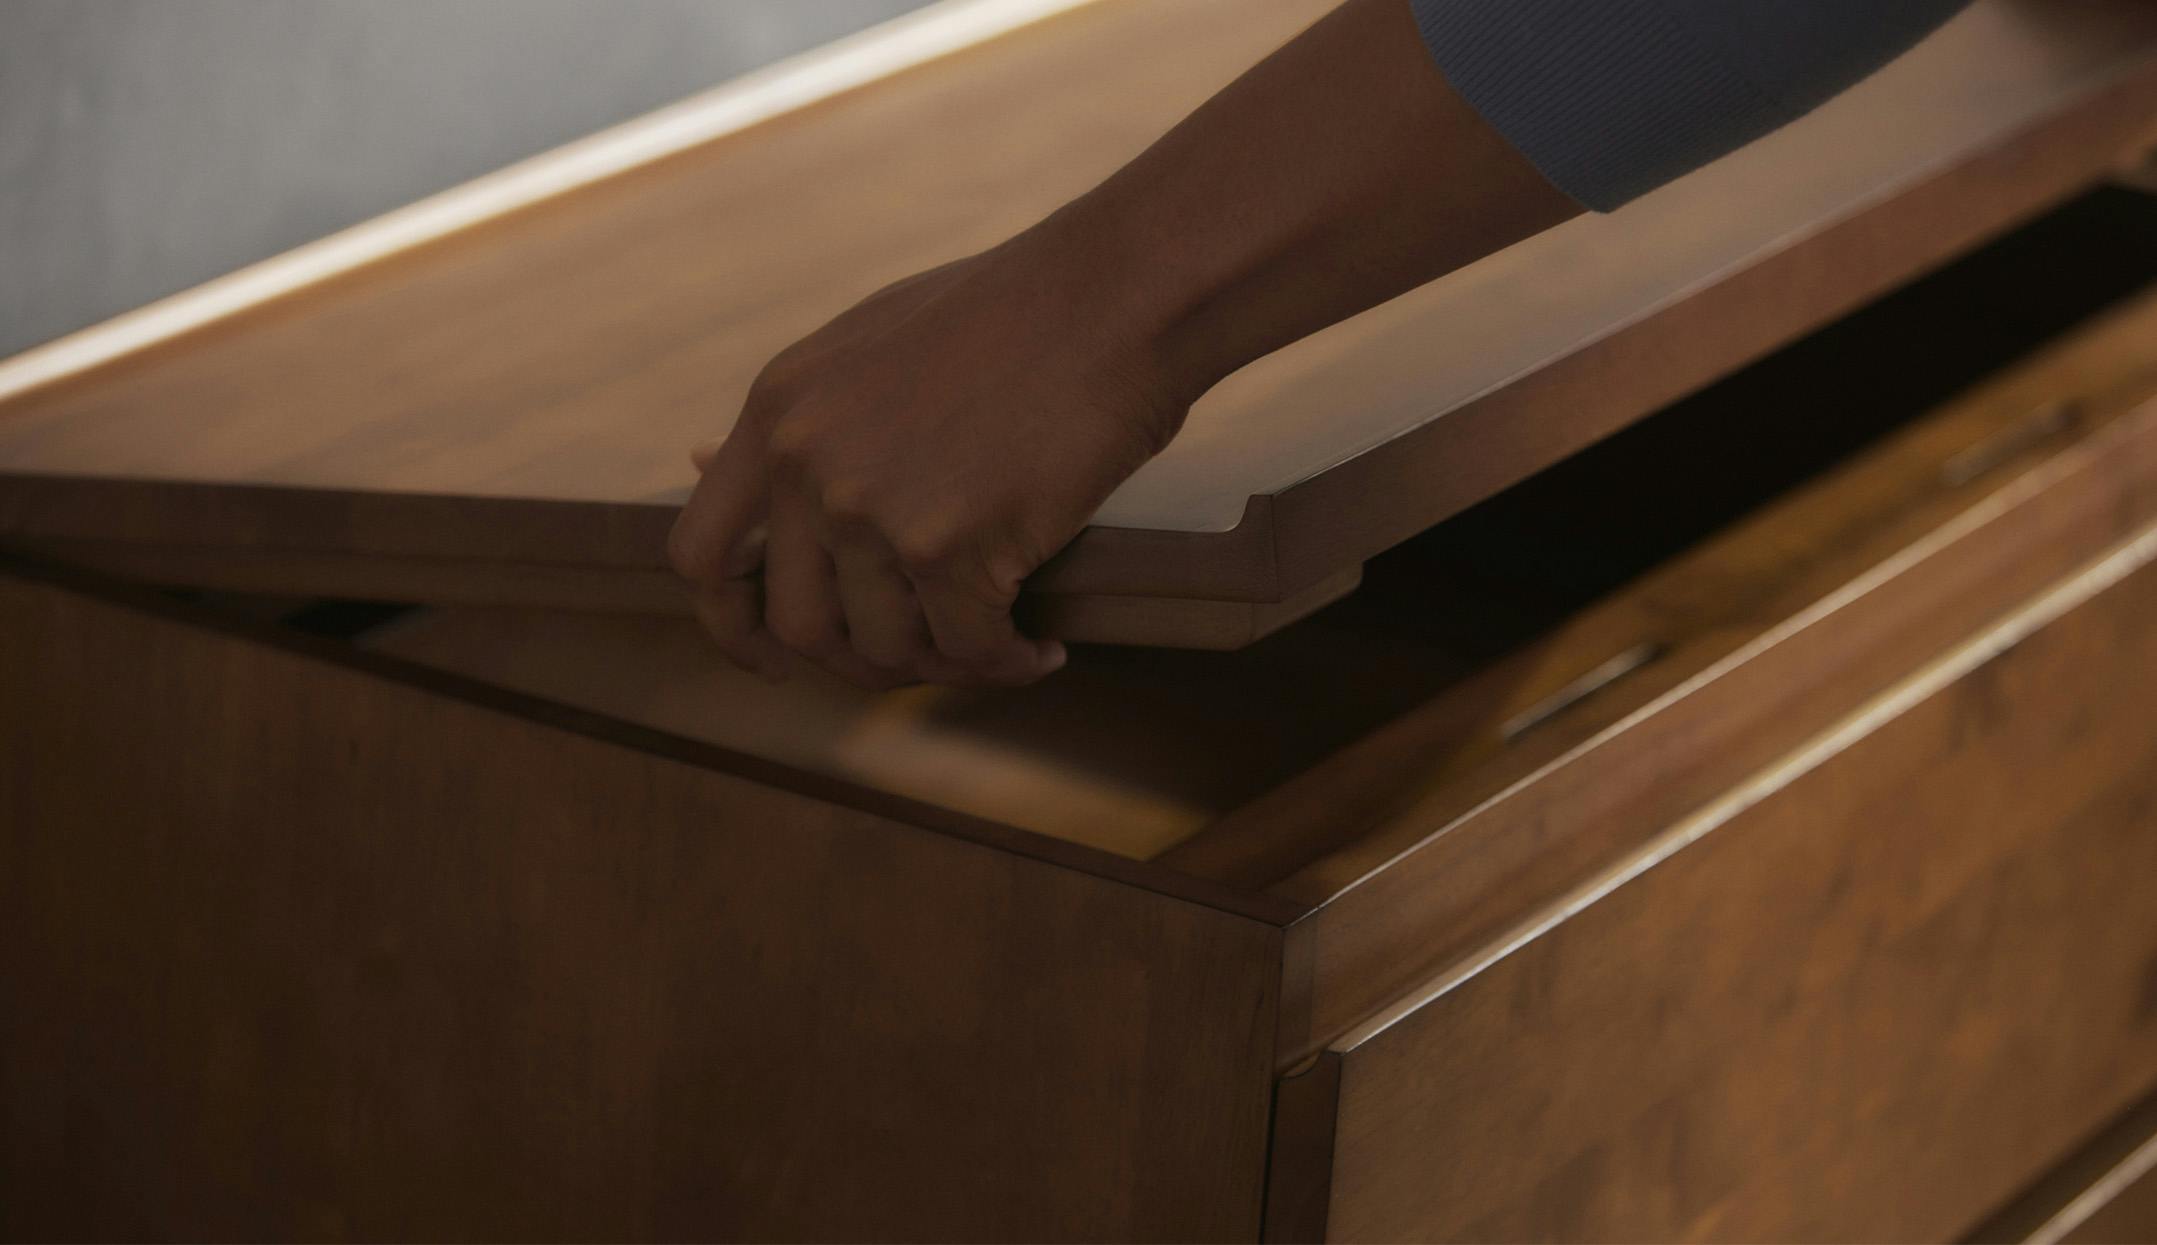 The Two Drawer Dresser (Thoughtful Detailing)